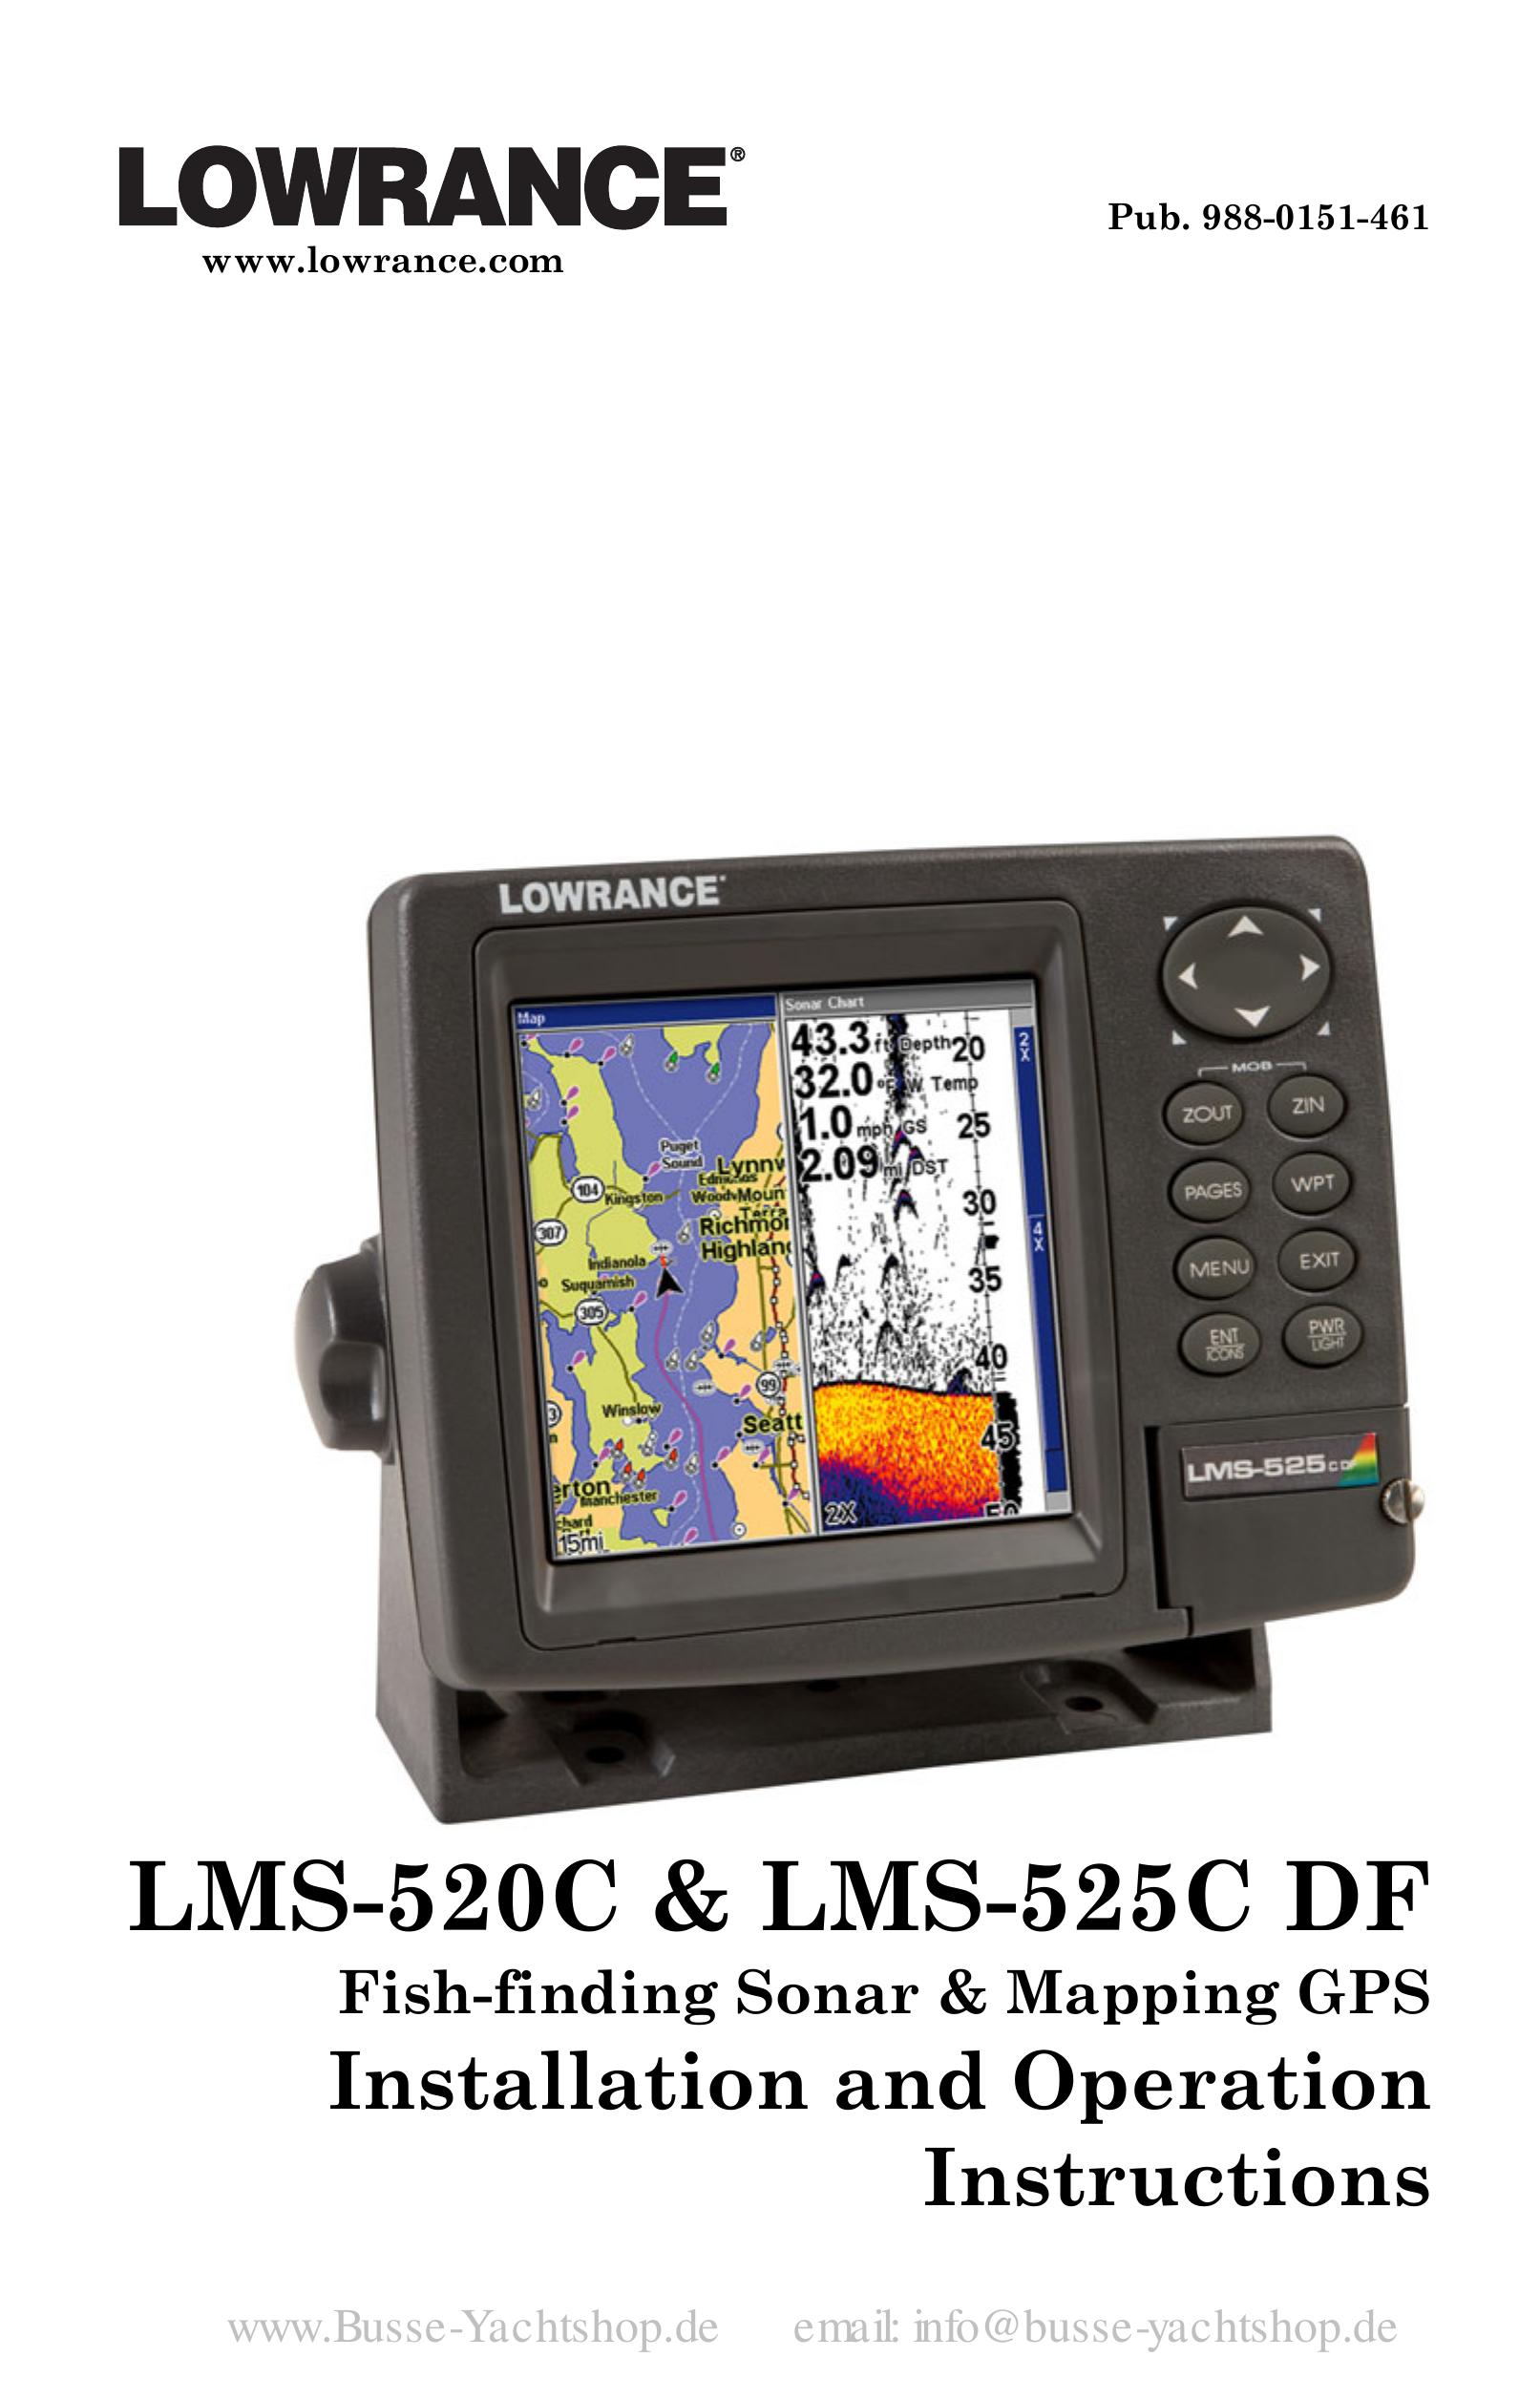 Lowrance electronic LMS-525C DF Fish Finder User Manual